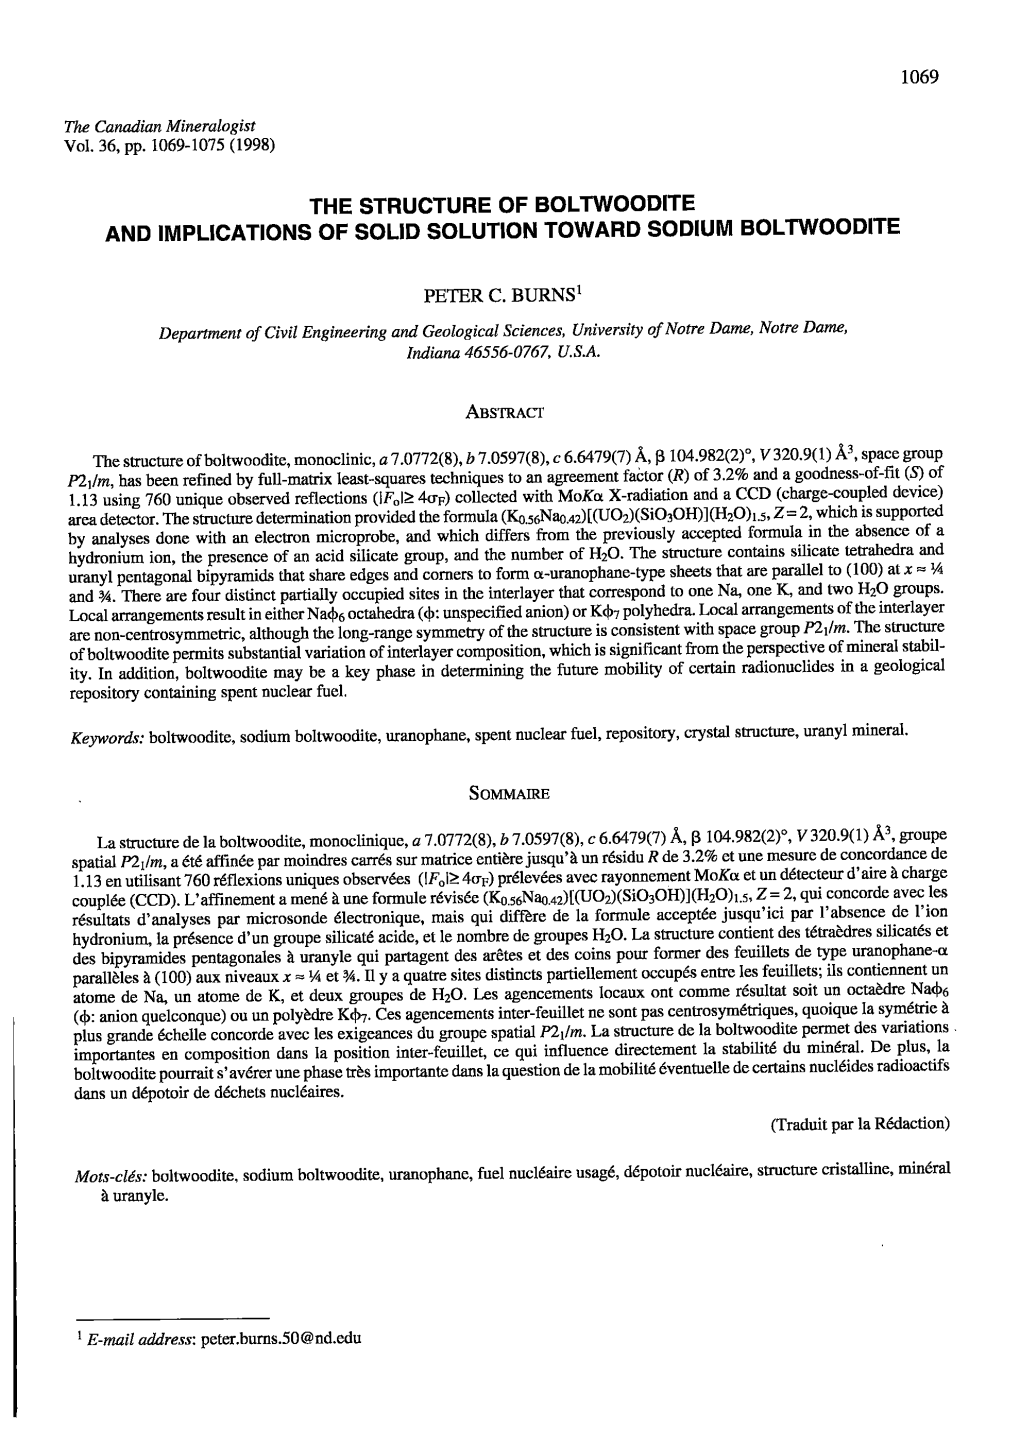 The Structure of Boltwoodite and Implications of Solid Solution Toward Sodium Boltwoodite